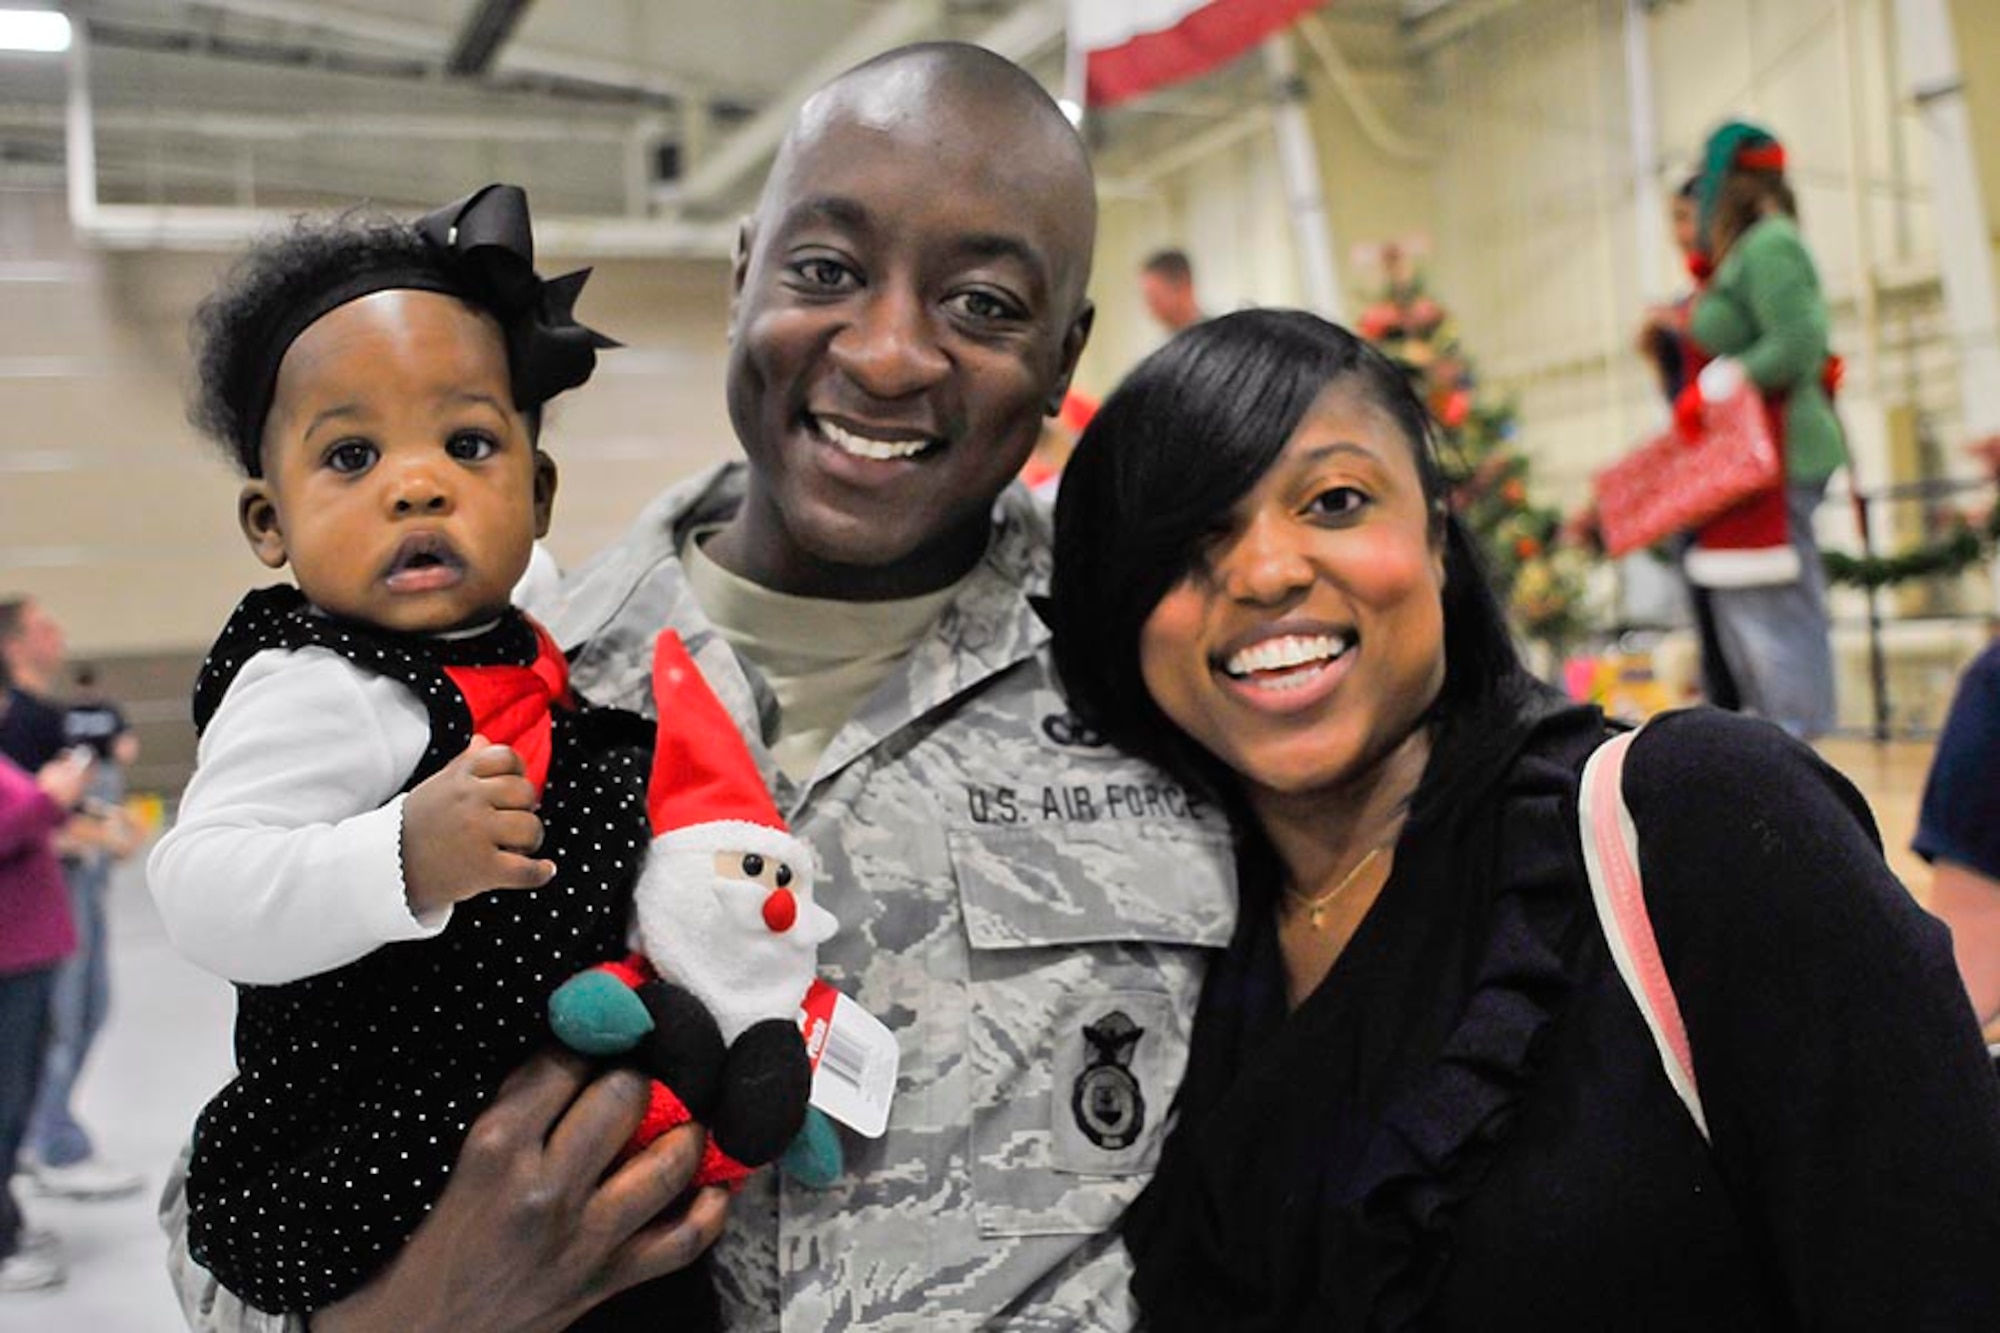 U.S. Air Force Technical Sergeant Steven Graves and his family at the base Christmas Party at the 182nd Airlift Wing, Peoria, IL on Decmber 2, 2012.  (U.S. Air Force photo by Master Sergeant Scott Thompson/Released)